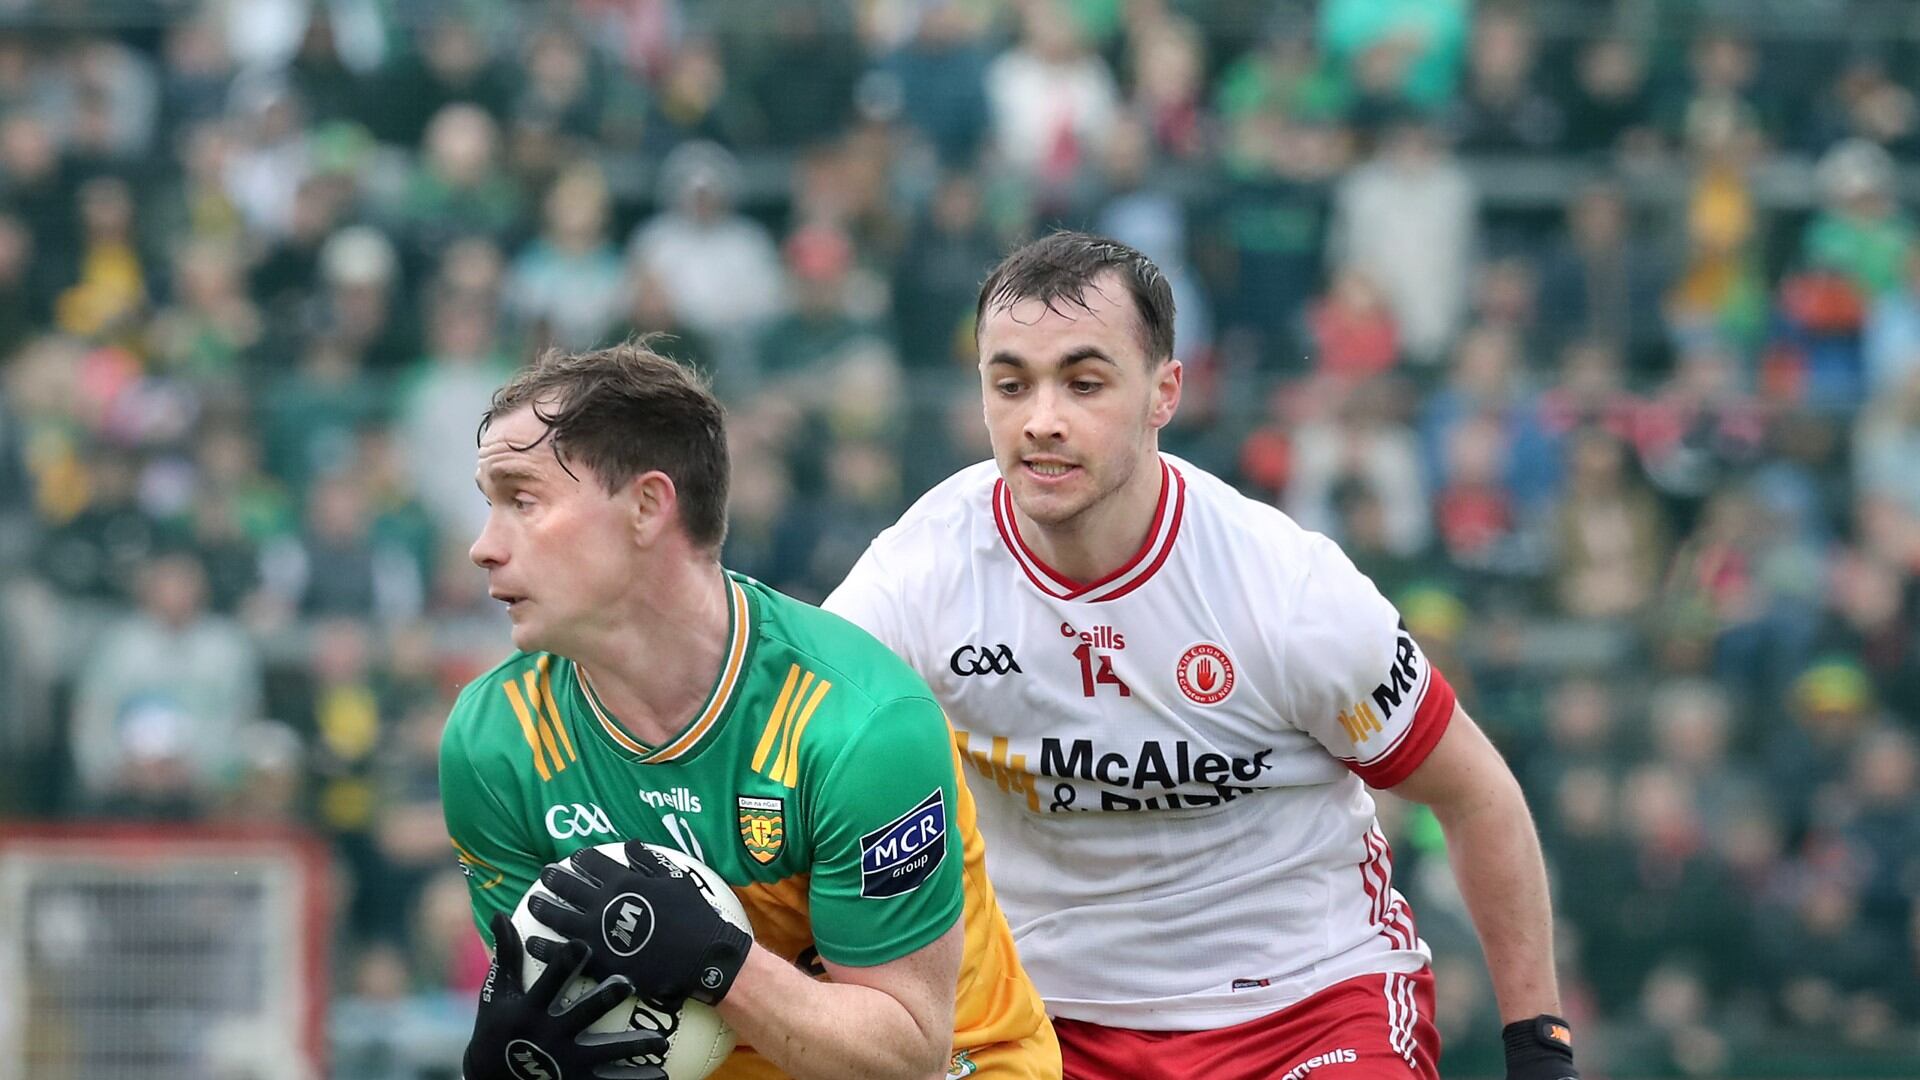 Darragh Canavan was limited to a couple of moments of class as Tyrone and Donegal battled it out at Celtic Park. Picture by Margaret McLaughlin